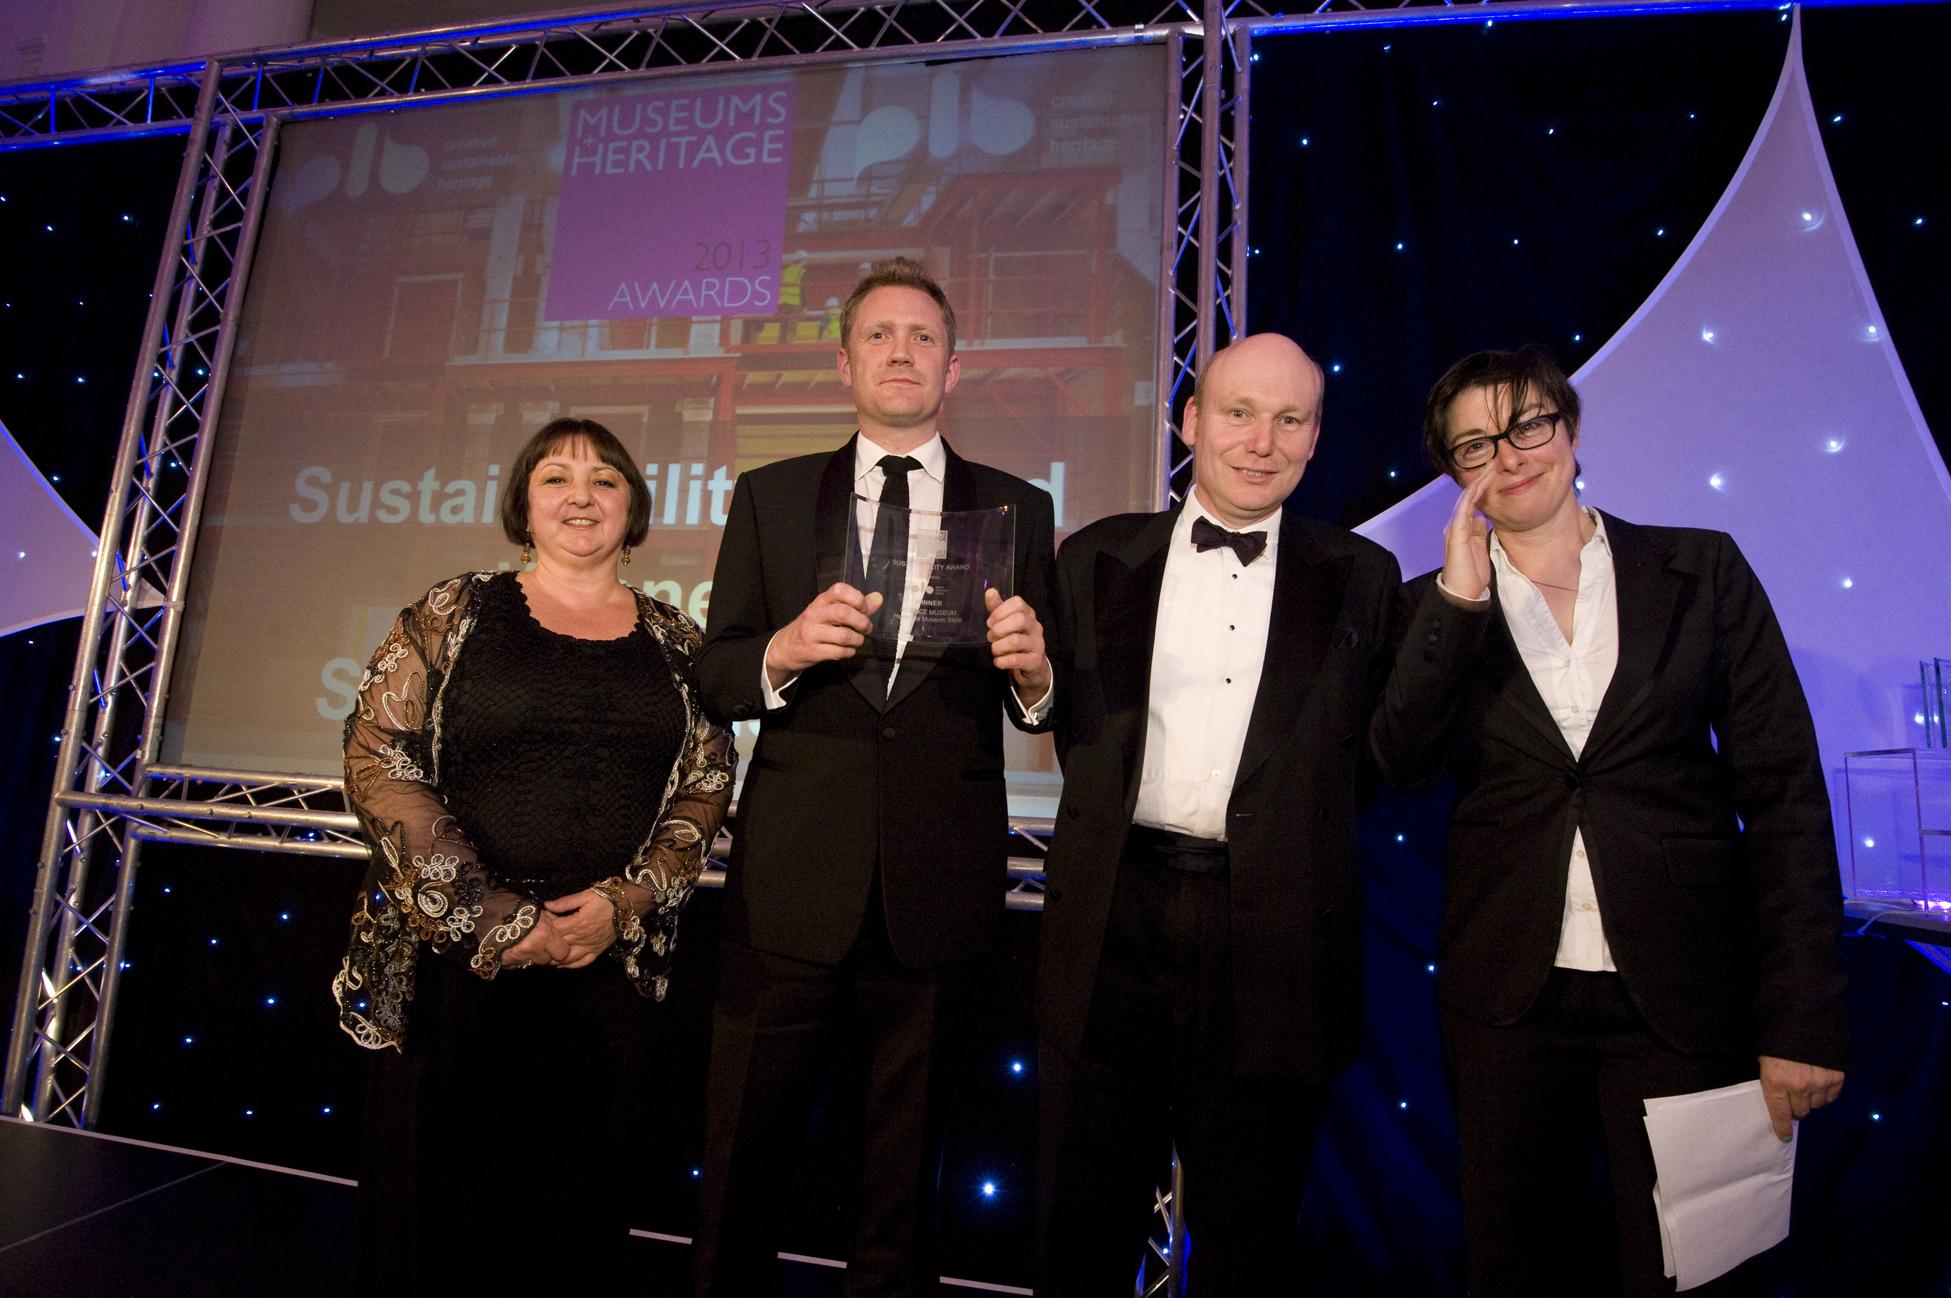 The Science Museum won in the Sustainability category at the Museums and Heritage Awards. Picture credit: M&H Show